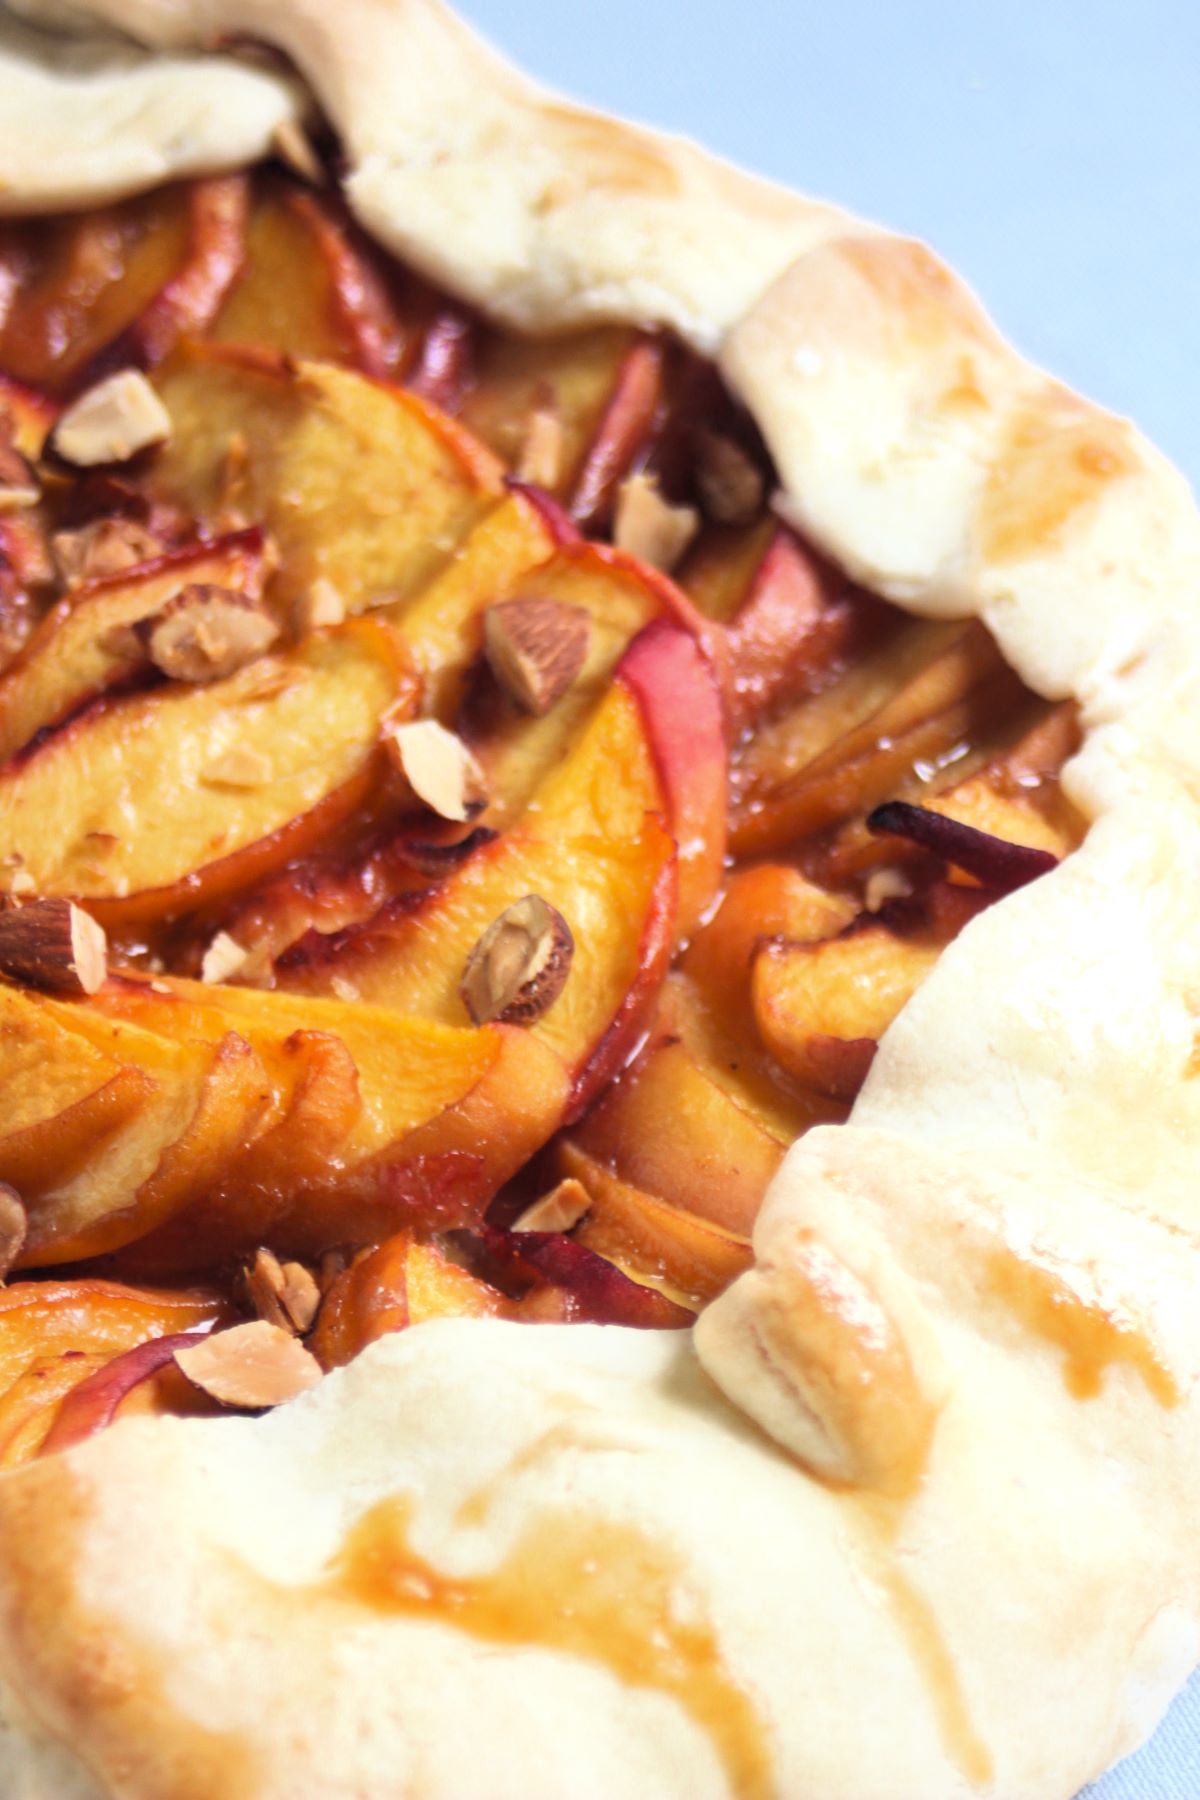 A part of the peach galette seen up close.